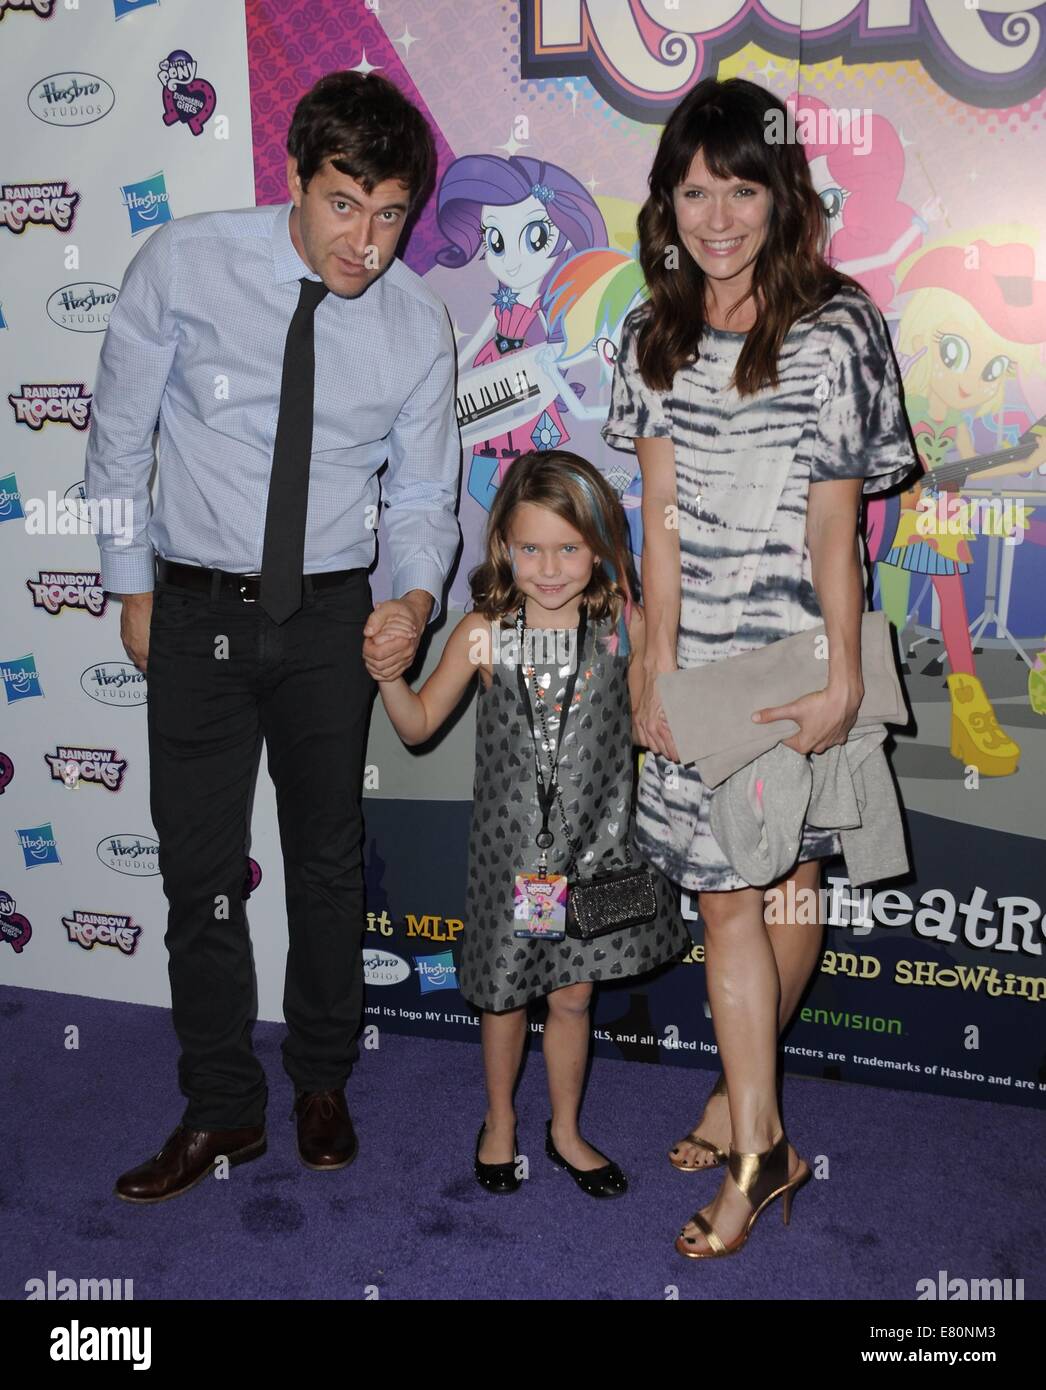 Los Angeles, CA, USA. 27th Sep, 2014. Mark Duplass, Katie Aselton, Daughter at arrivals for My Little Pony Equestria Girls Premiere Premiere, TCL Chinese 6 Theatres (formerly Grauman's), Los Angeles, CA September 27, 2014. Credit:  Dee Cercone/Everett Collection/Alamy Live News Stock Photo